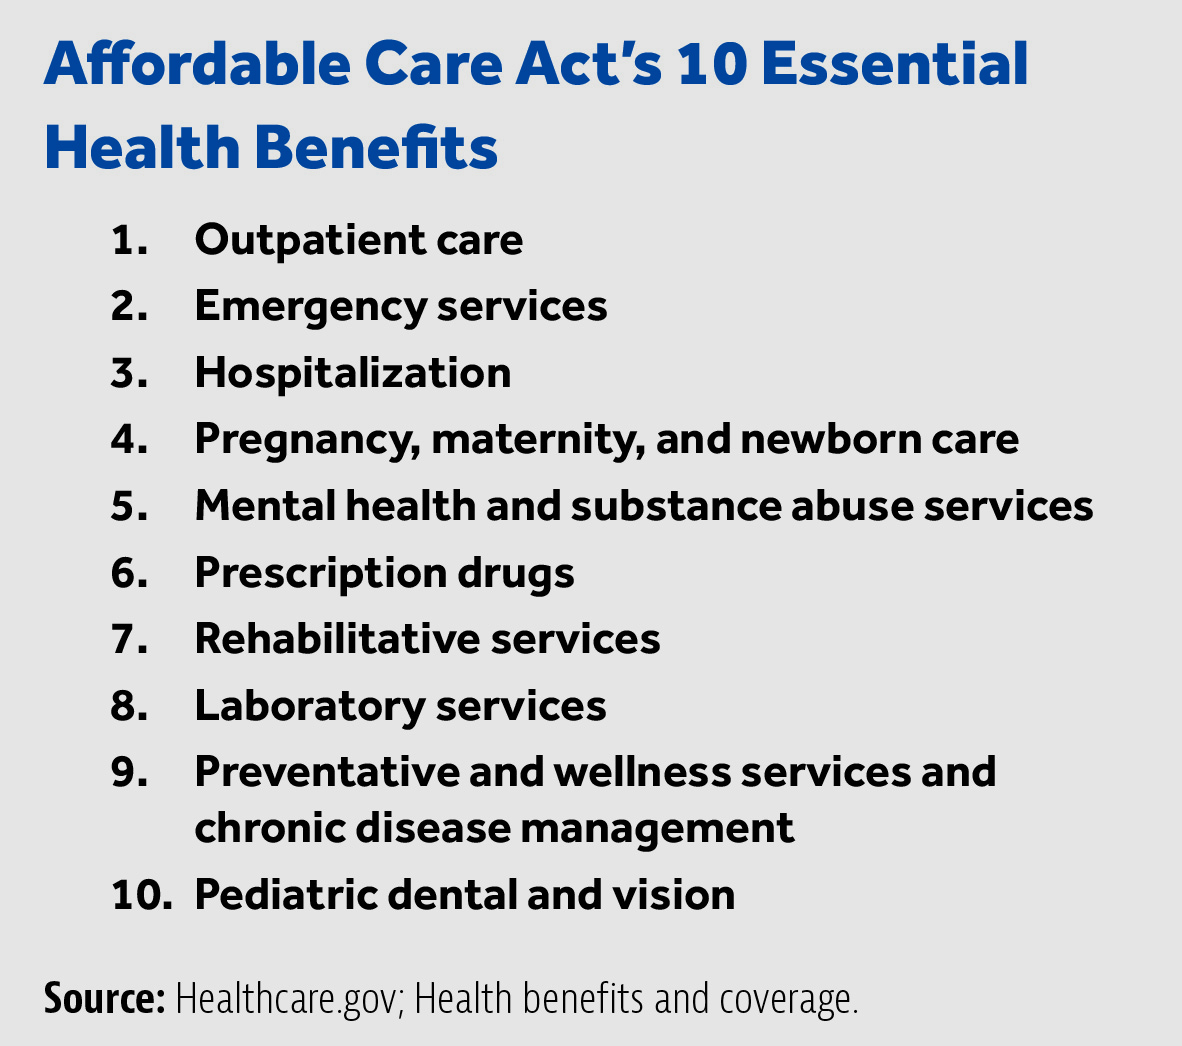 Affordable Care Act (ACA) Definition